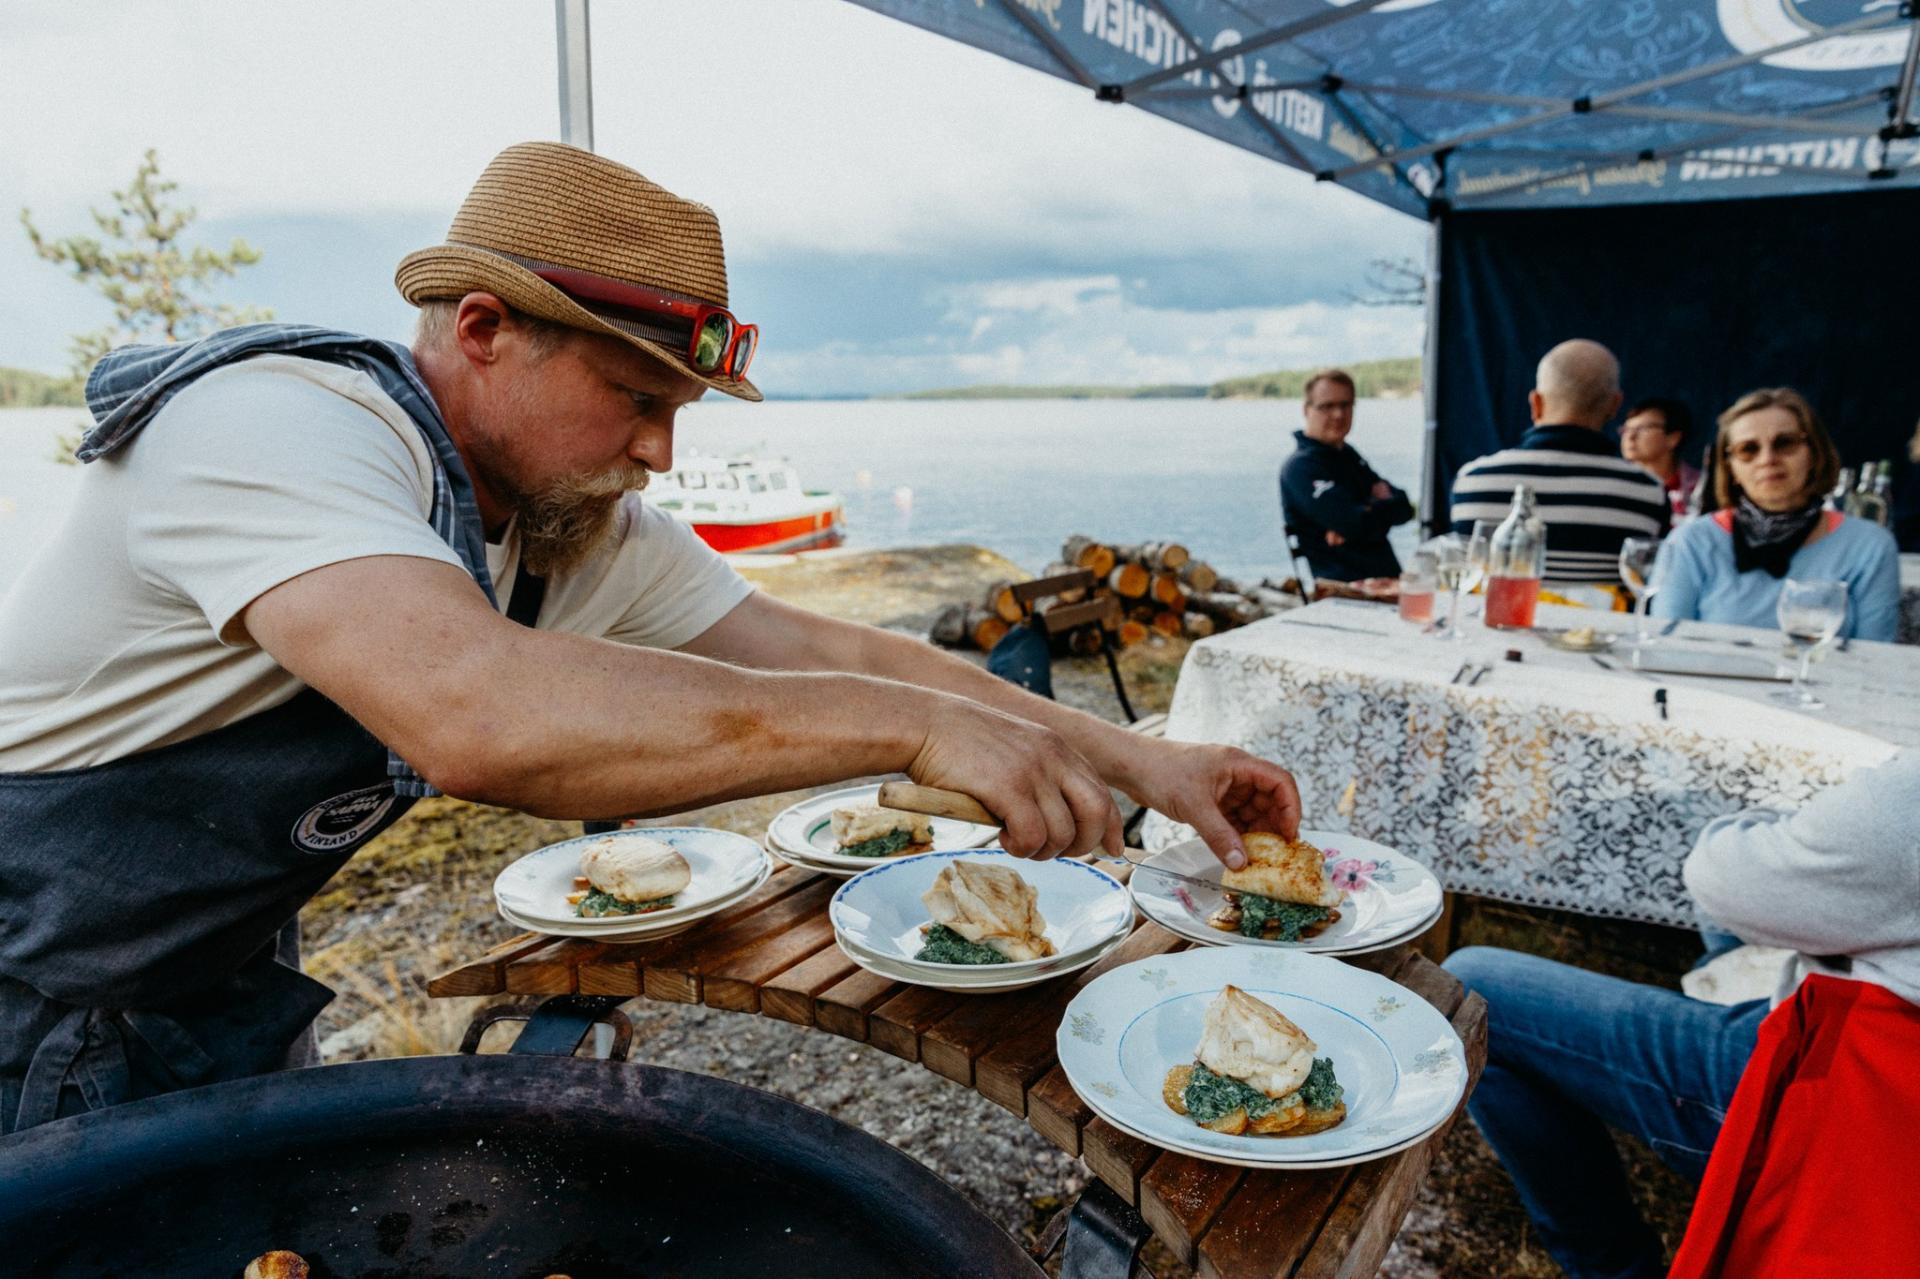 A man is preparing dishes on plates outdoors by a lake. 